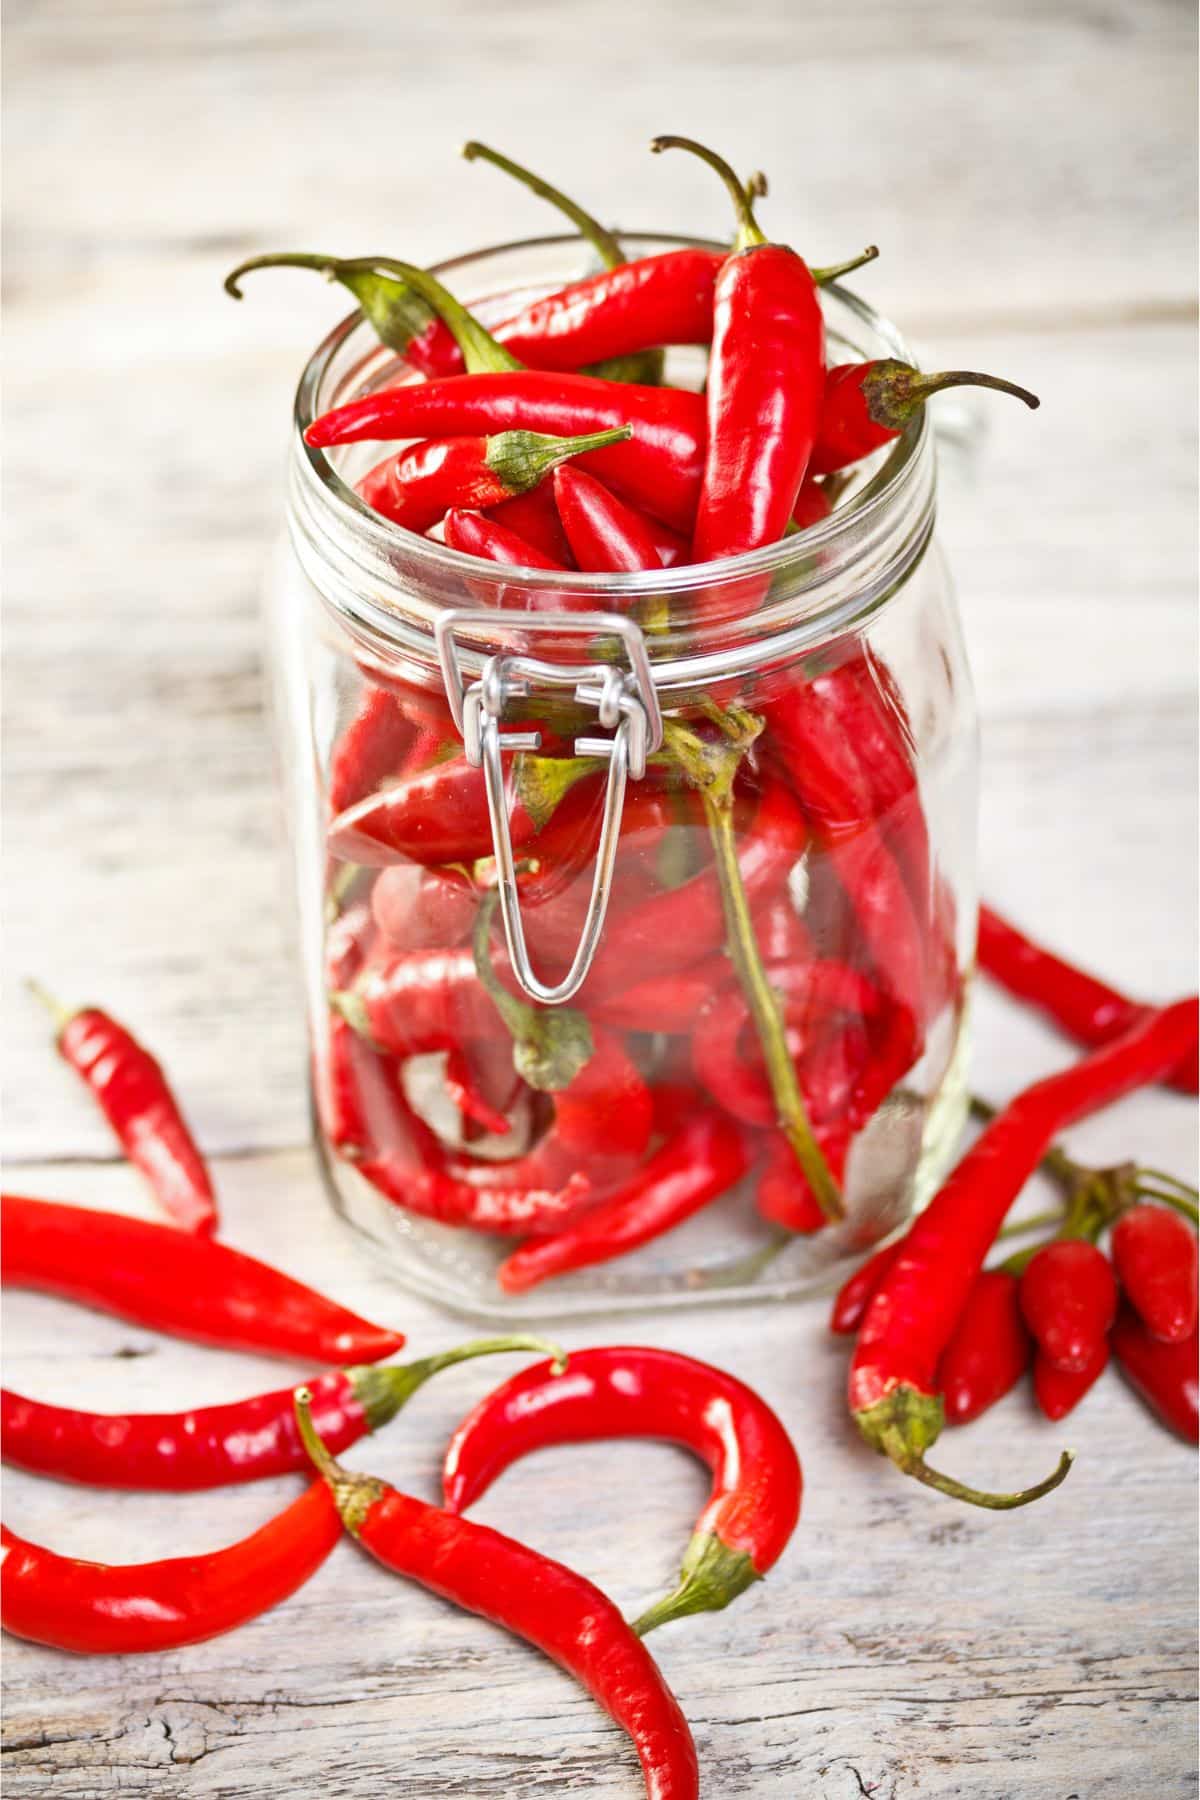 Jar of chili peppers on wooden surface.